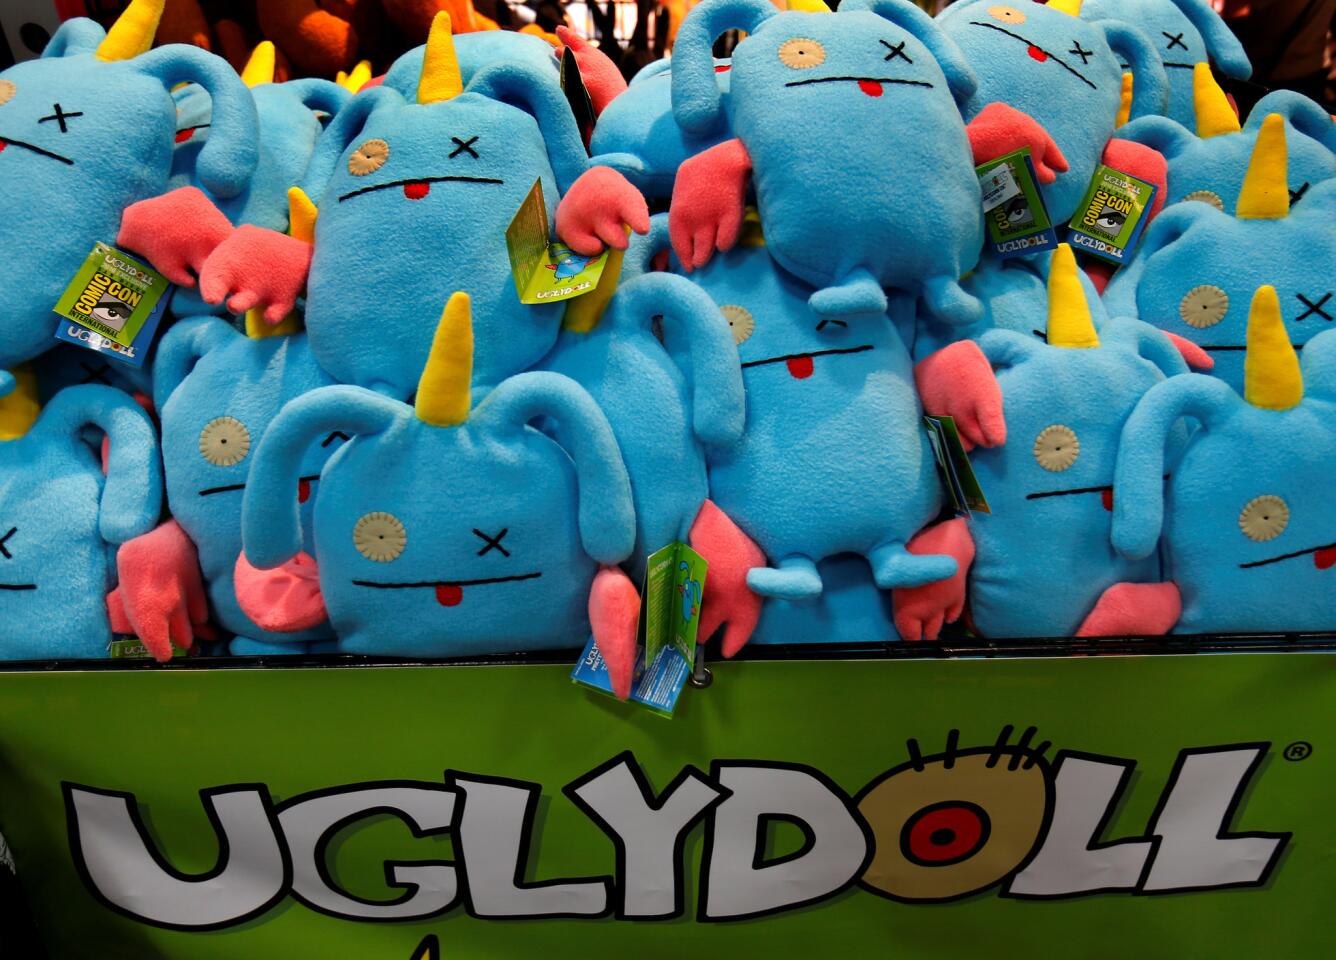 Uglydolls are sown for sale on the convention floor during opening day of Comic-Con International in San Diego,